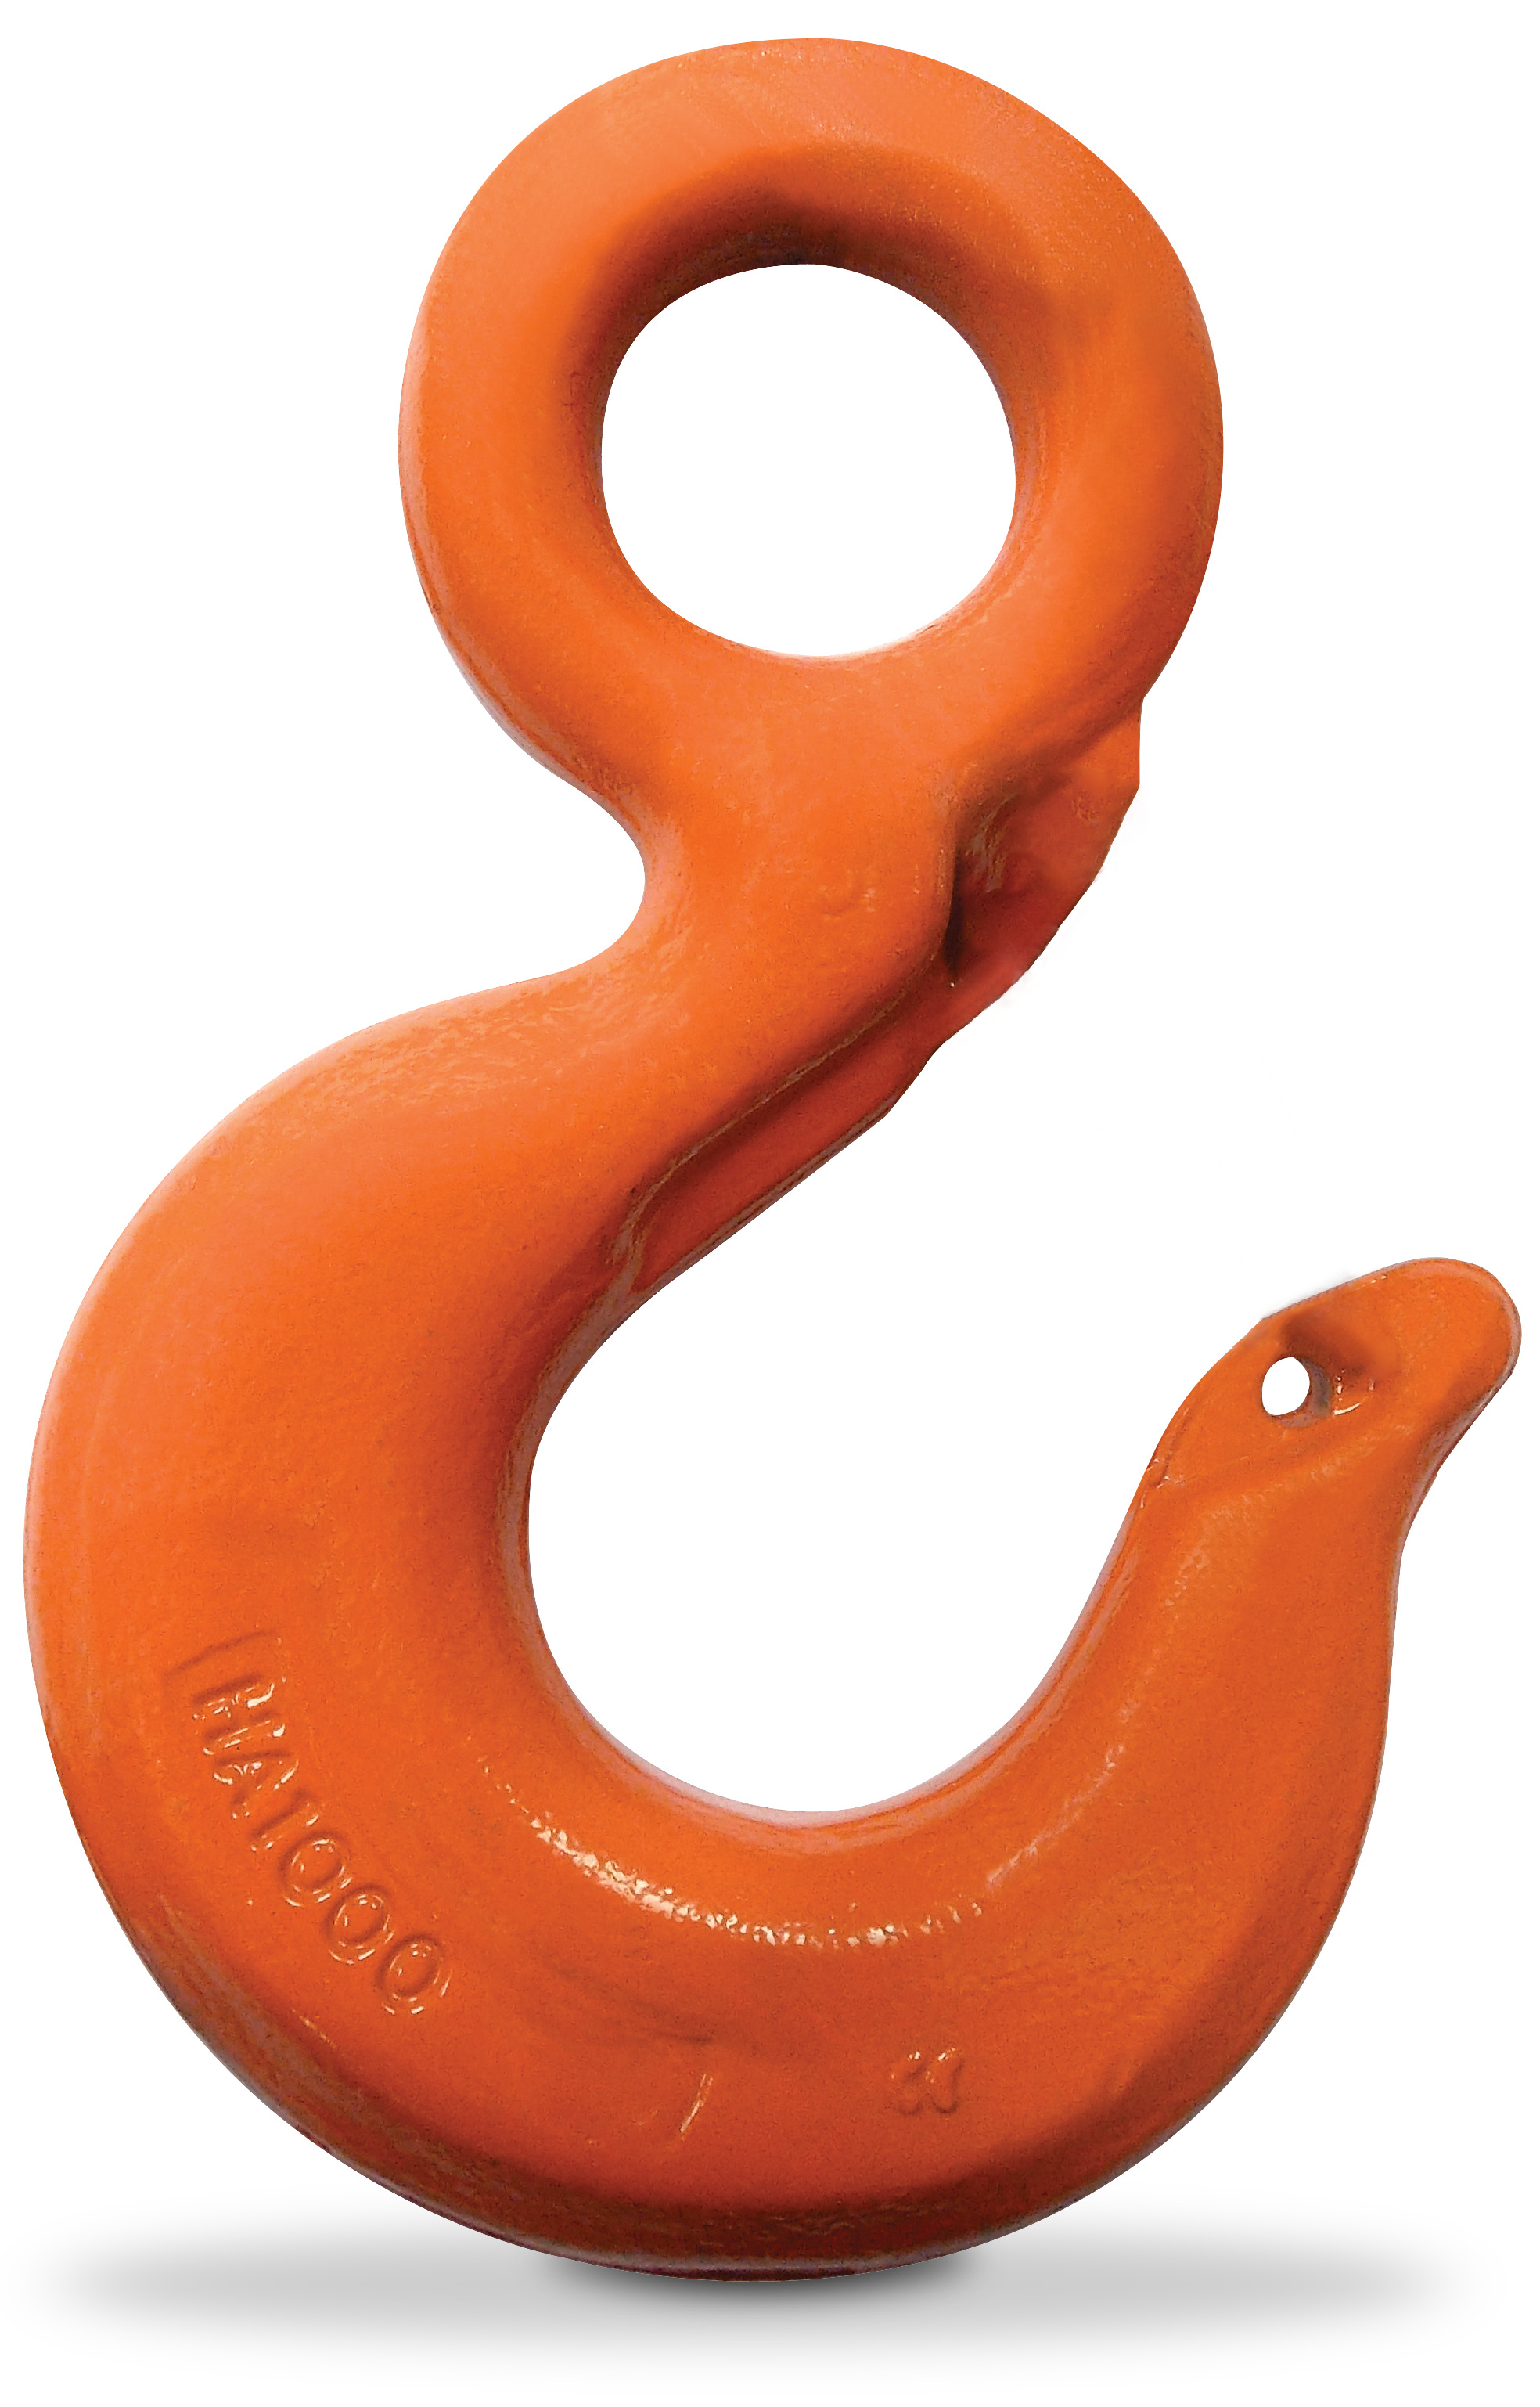 CM Dual Rated Rigging Hook, Working Load Limit 4,300 lbs., Part No. M7403A